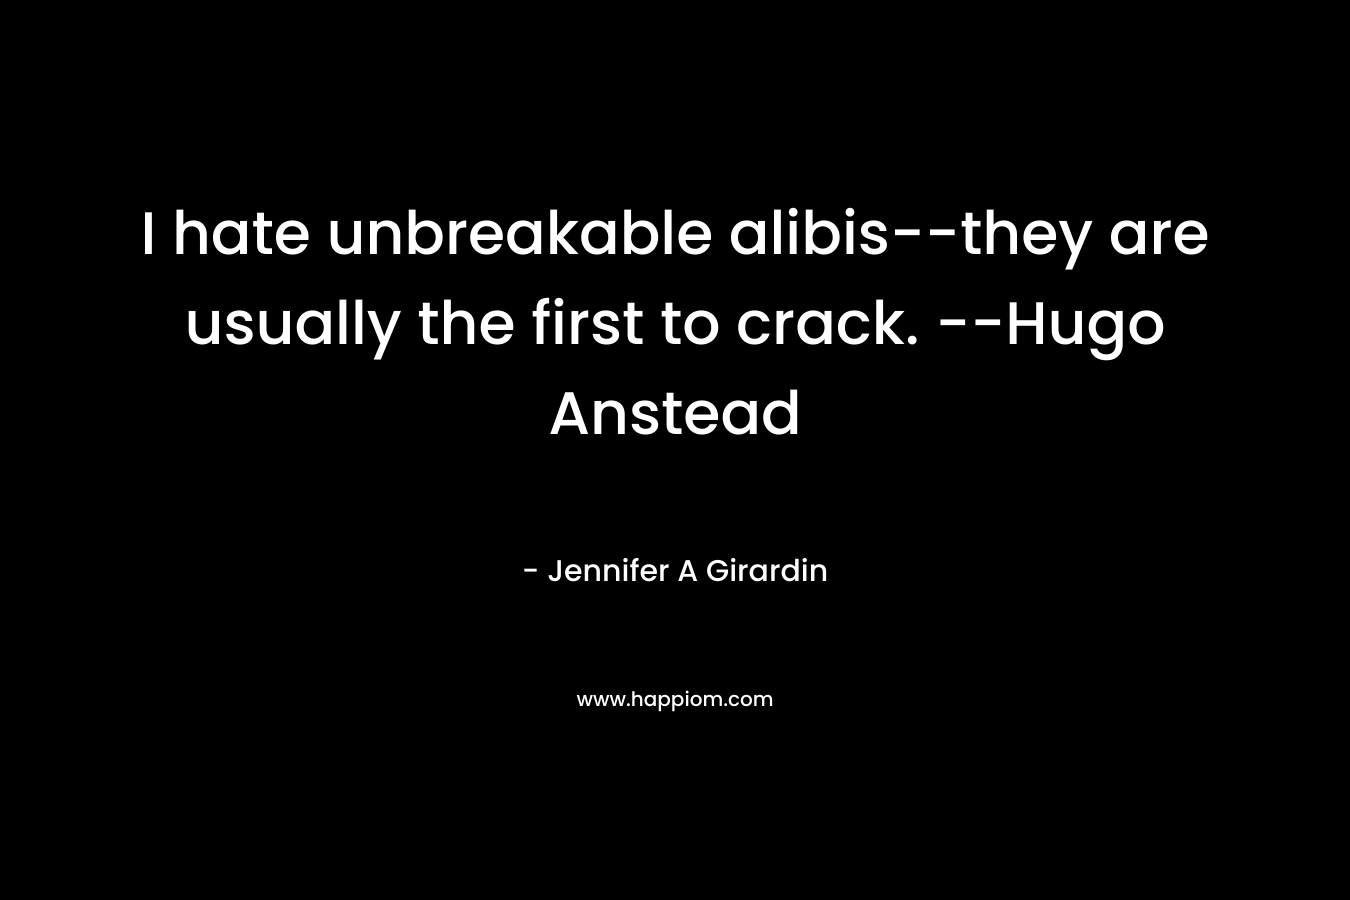 I hate unbreakable alibis--they are usually the first to crack. --Hugo Anstead